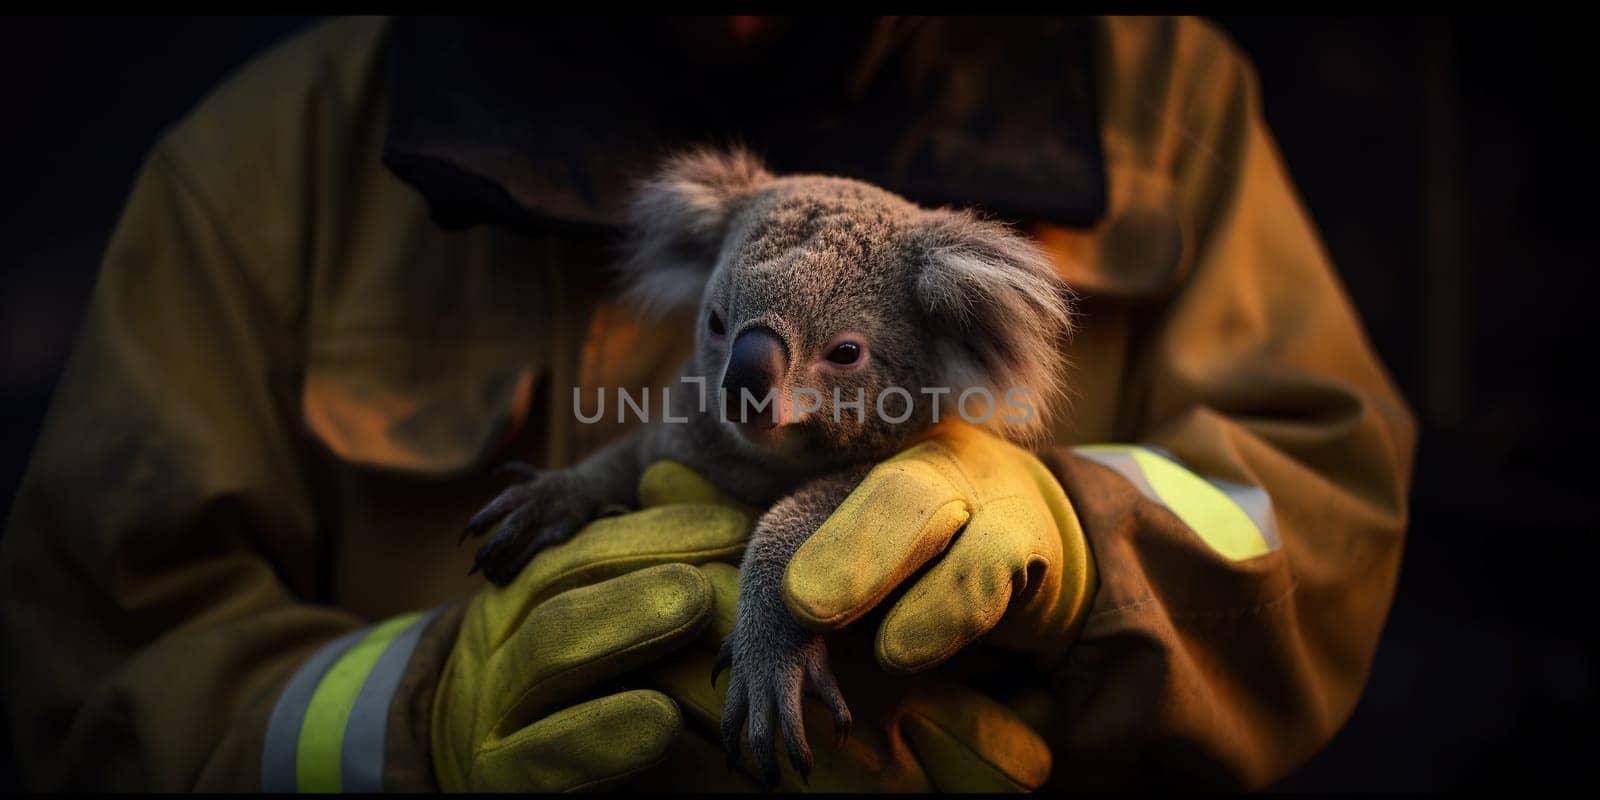 Fireman Holding Wild Koala Bear Child During Fire In Forest , Concept Nature Wild Life Saving